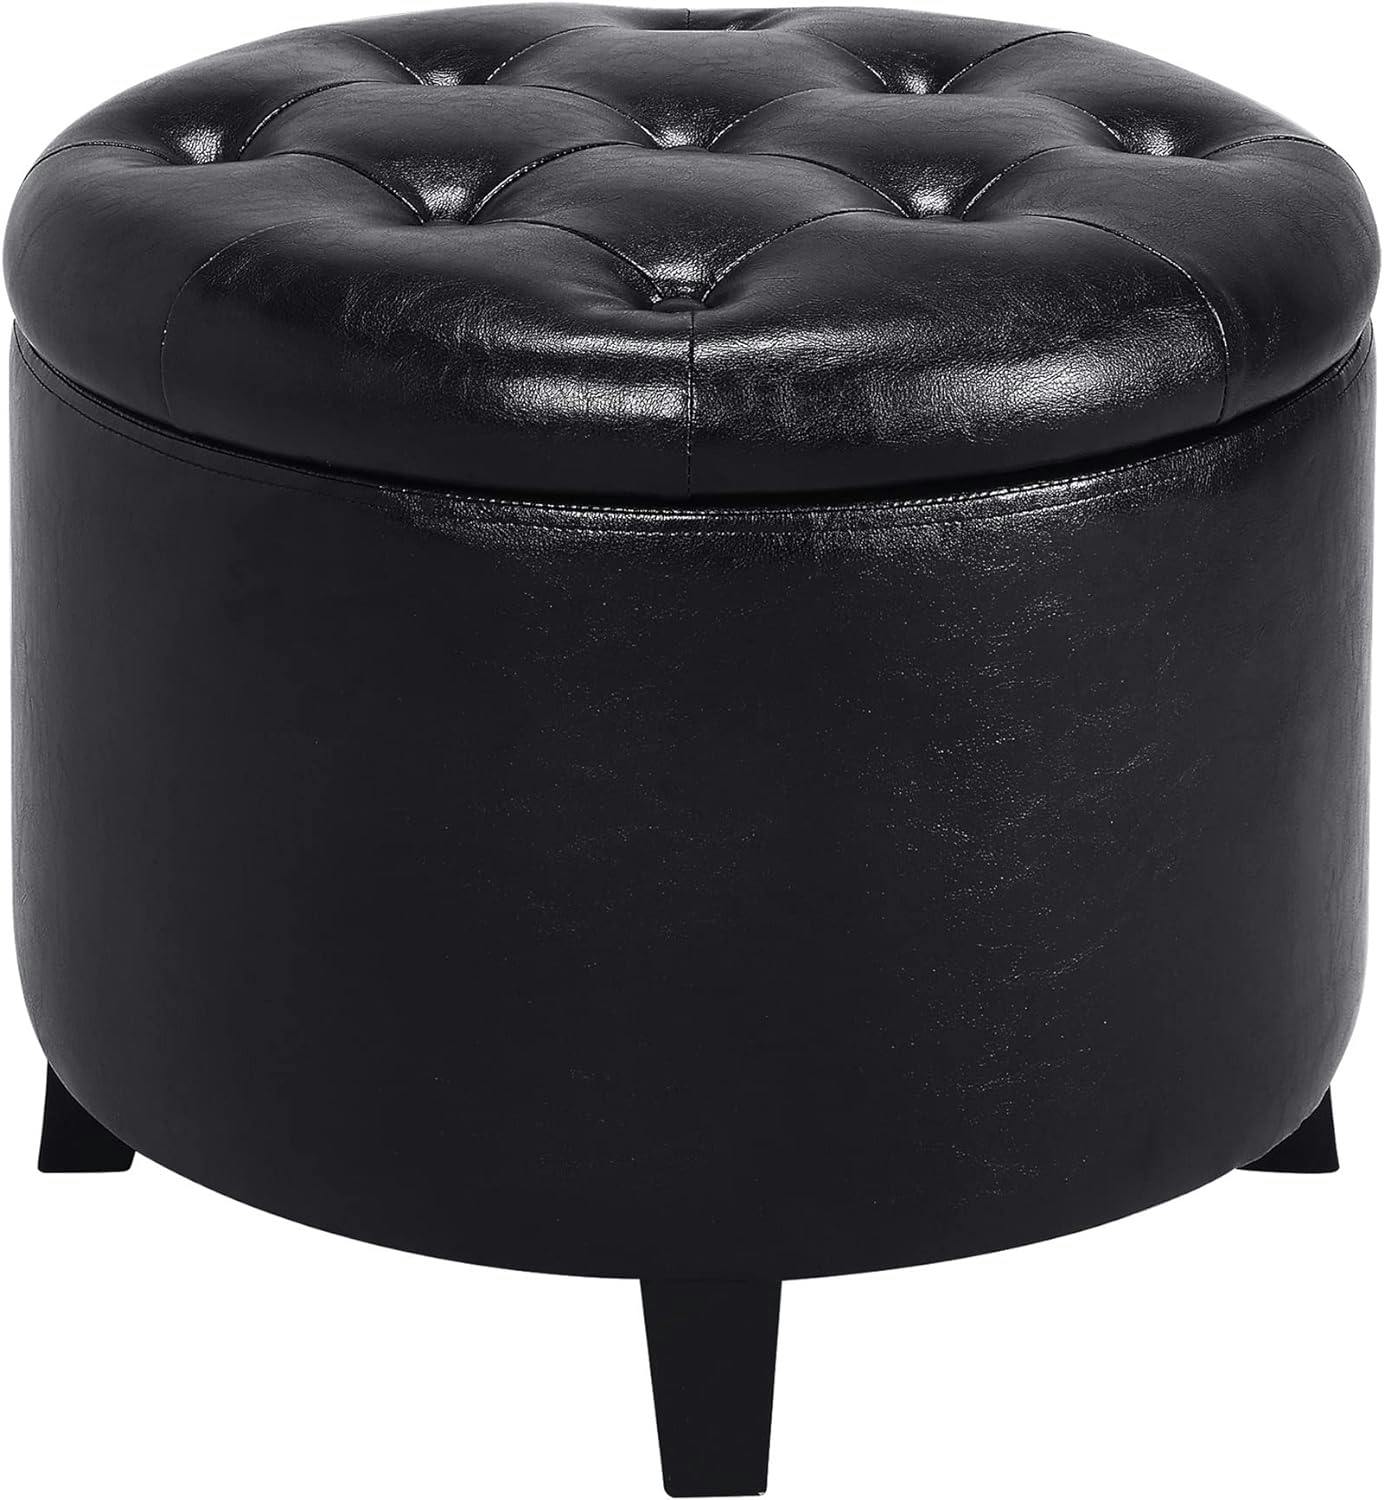 Elegant Traditional Black Faux Leather Round Storage Ottoman with Tufted Lid